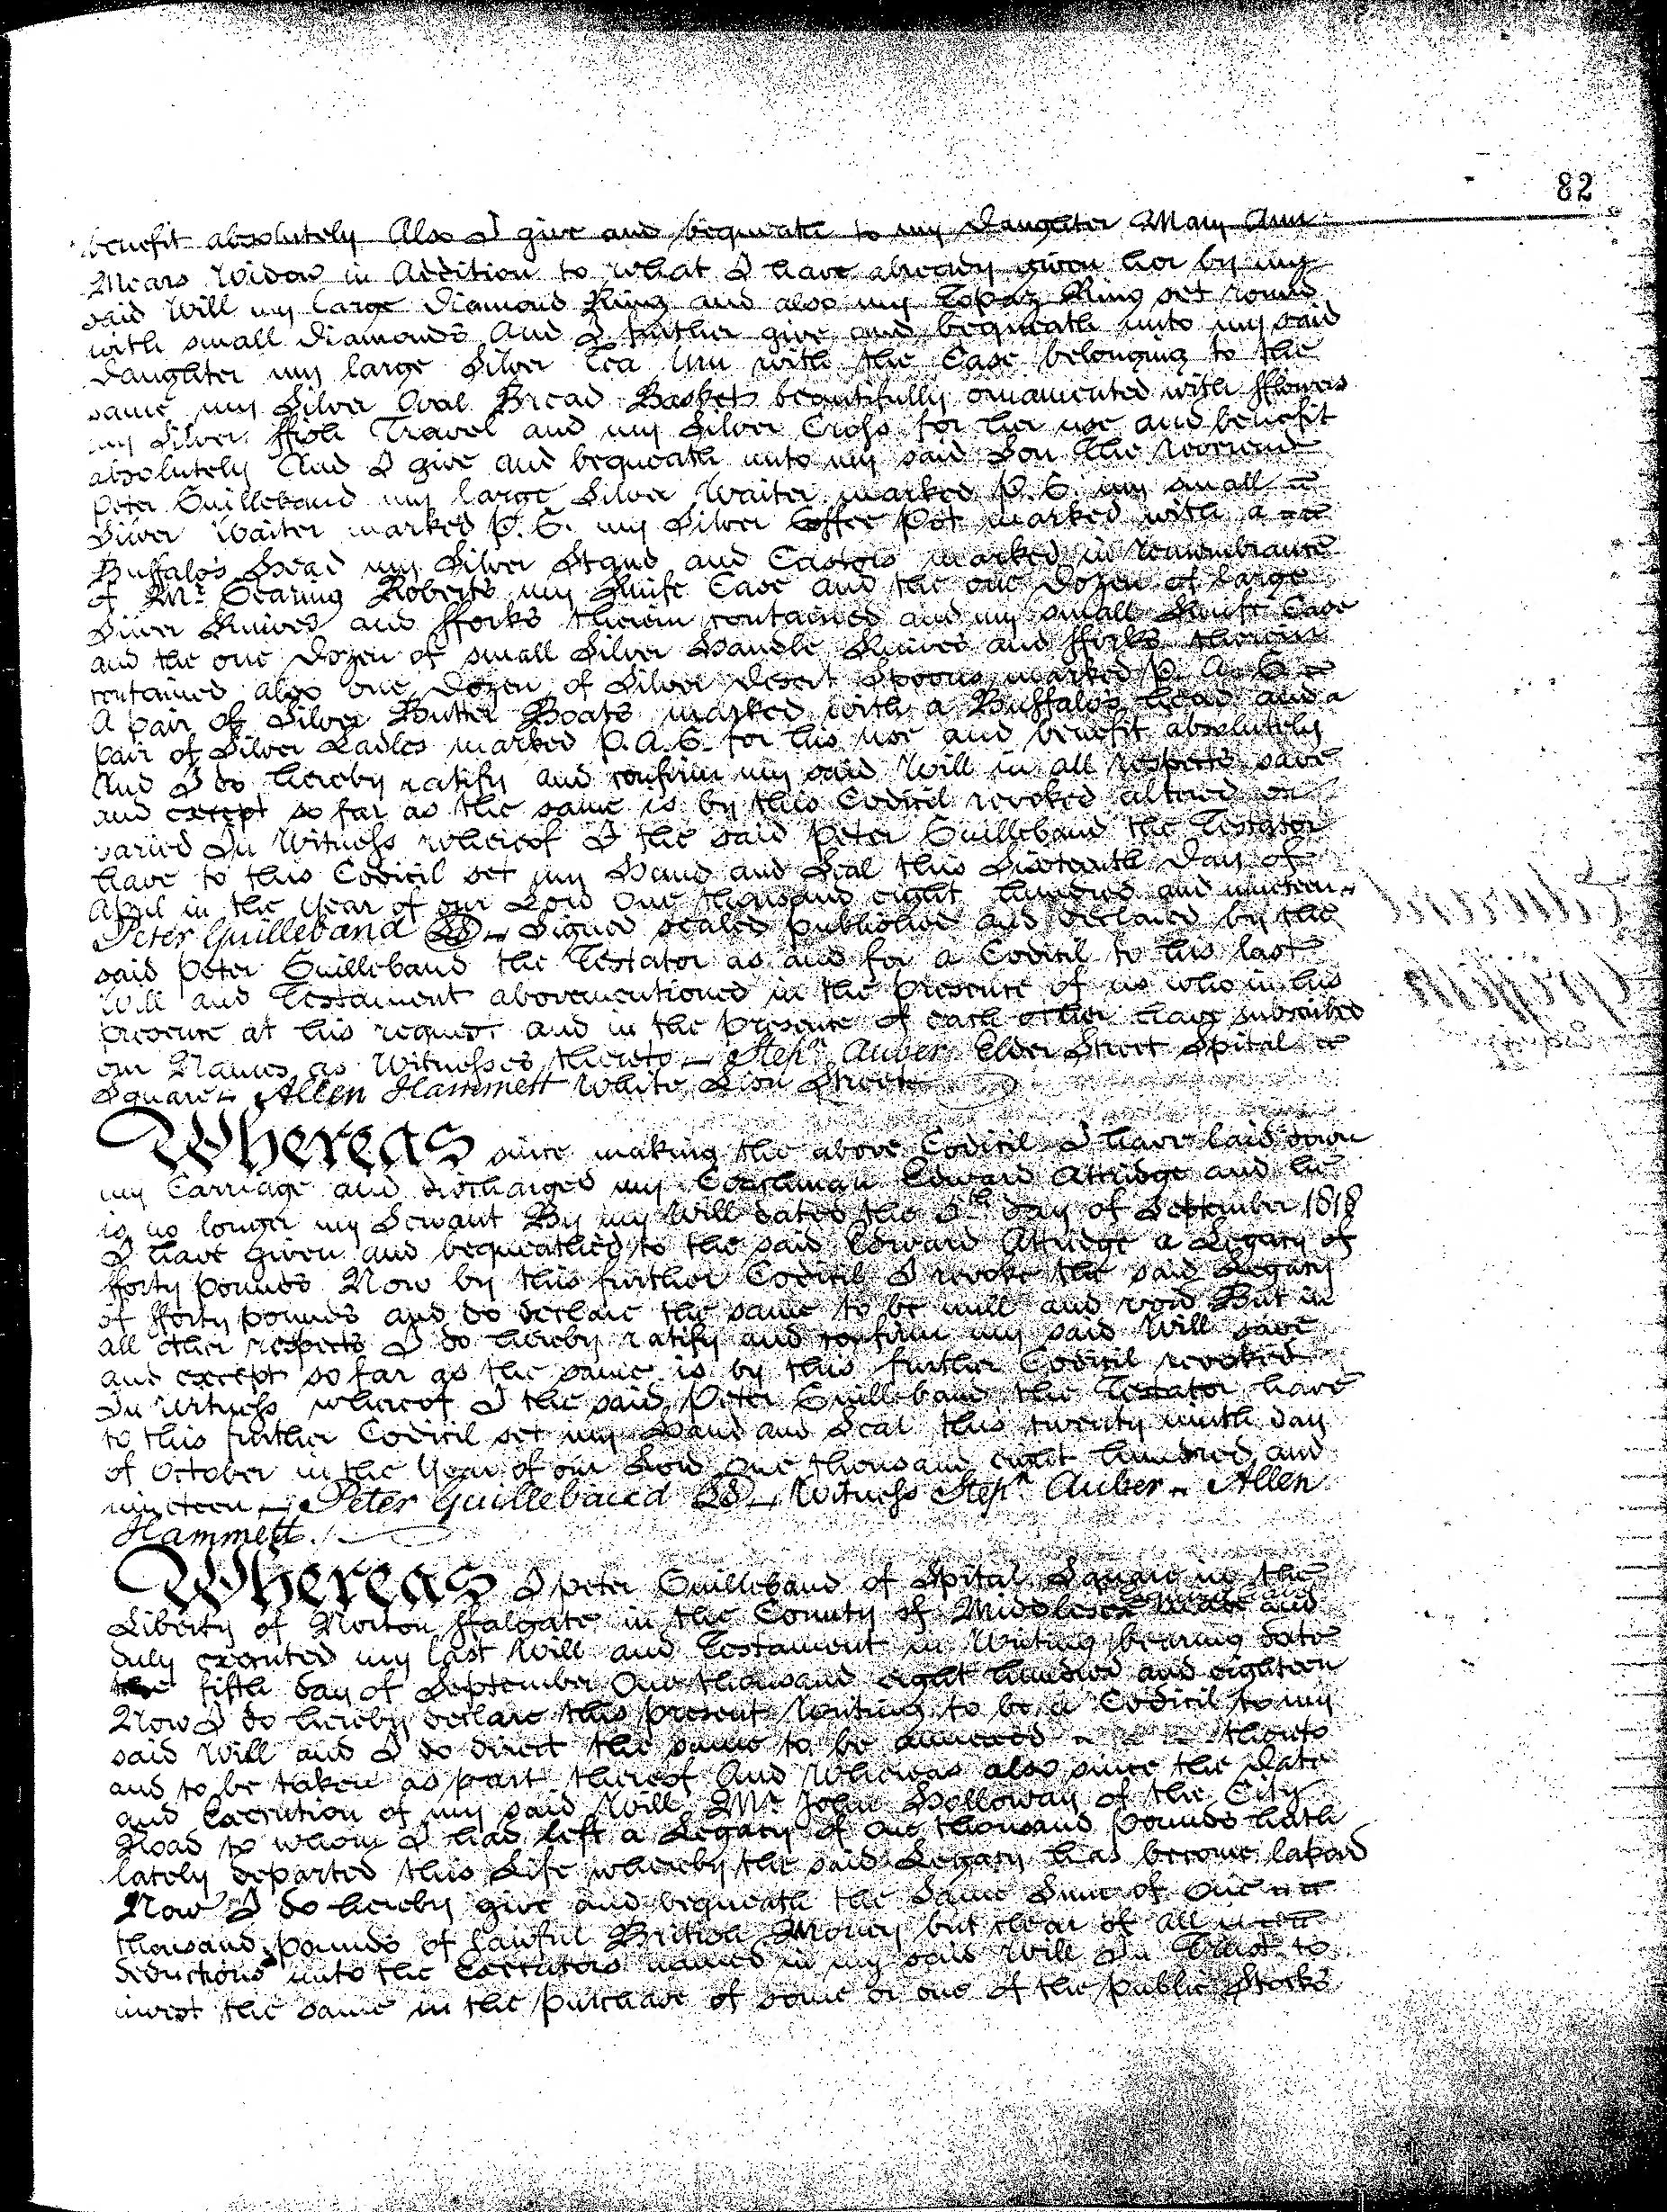 Peter Guillebaud’s will of 1821, page 6